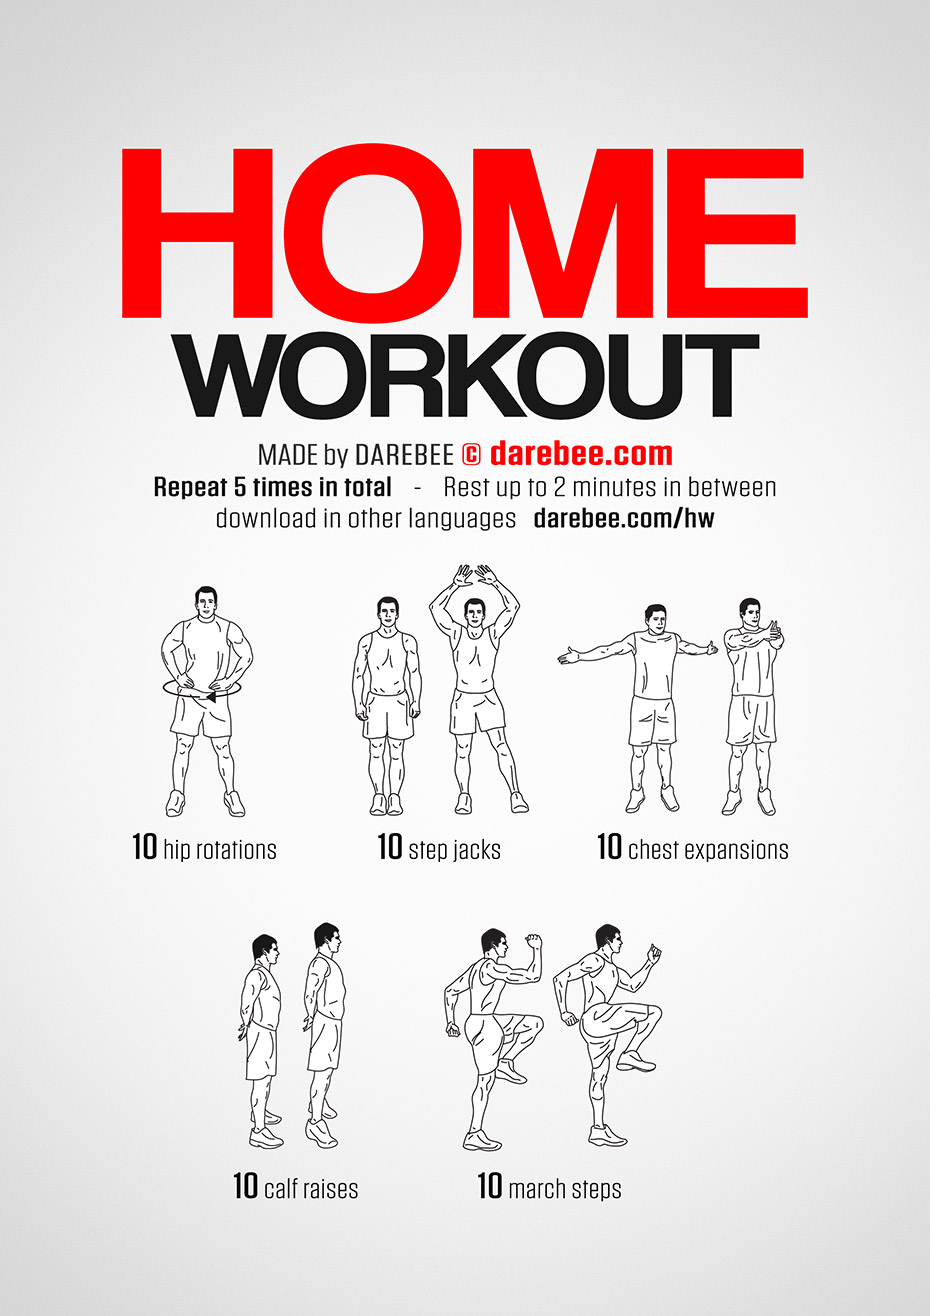 https://darebee.com/images/workouts/home-workout.jpg